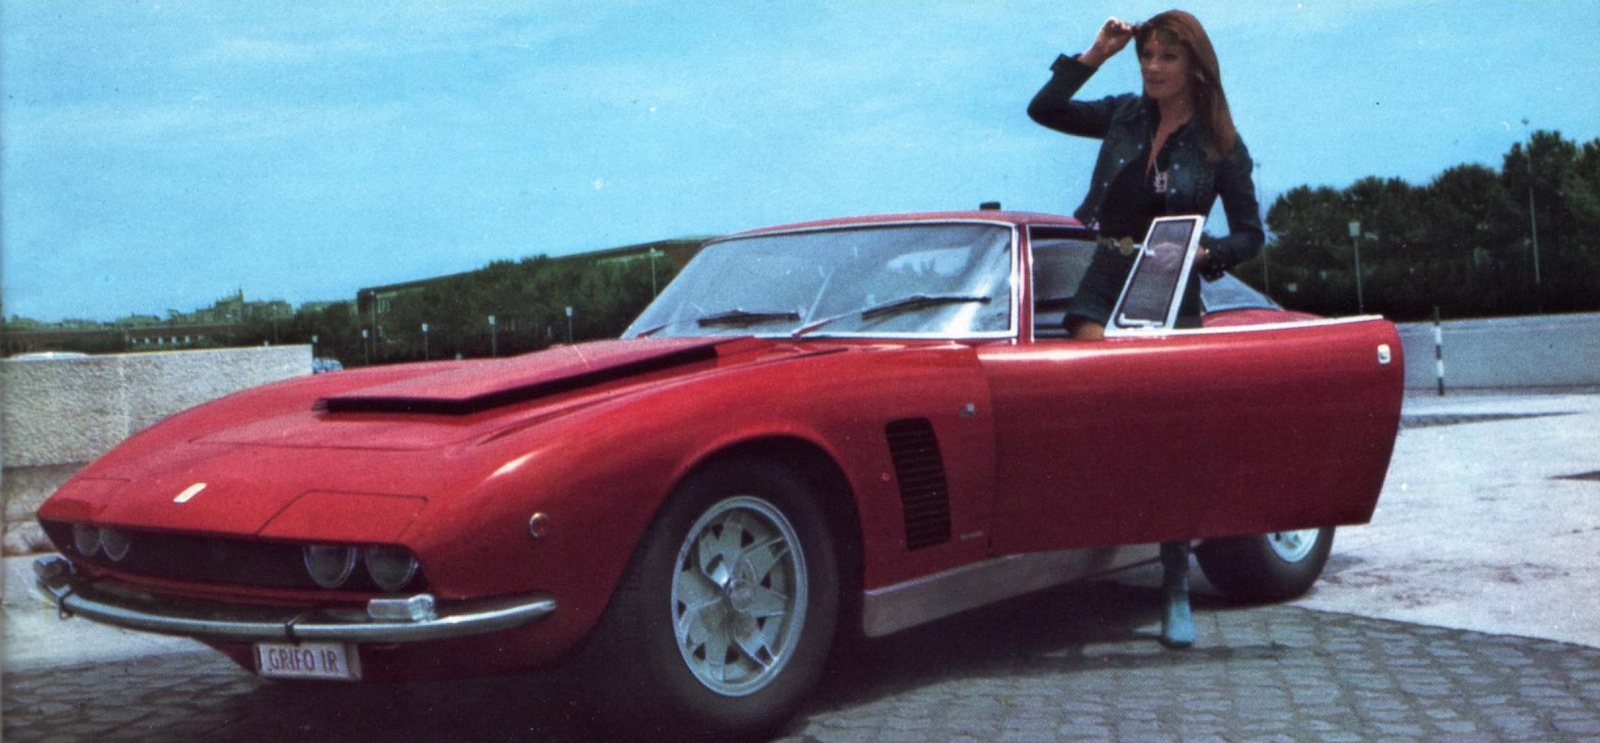 Iso Grifo Hood Scoop - The Most Unusual Ever